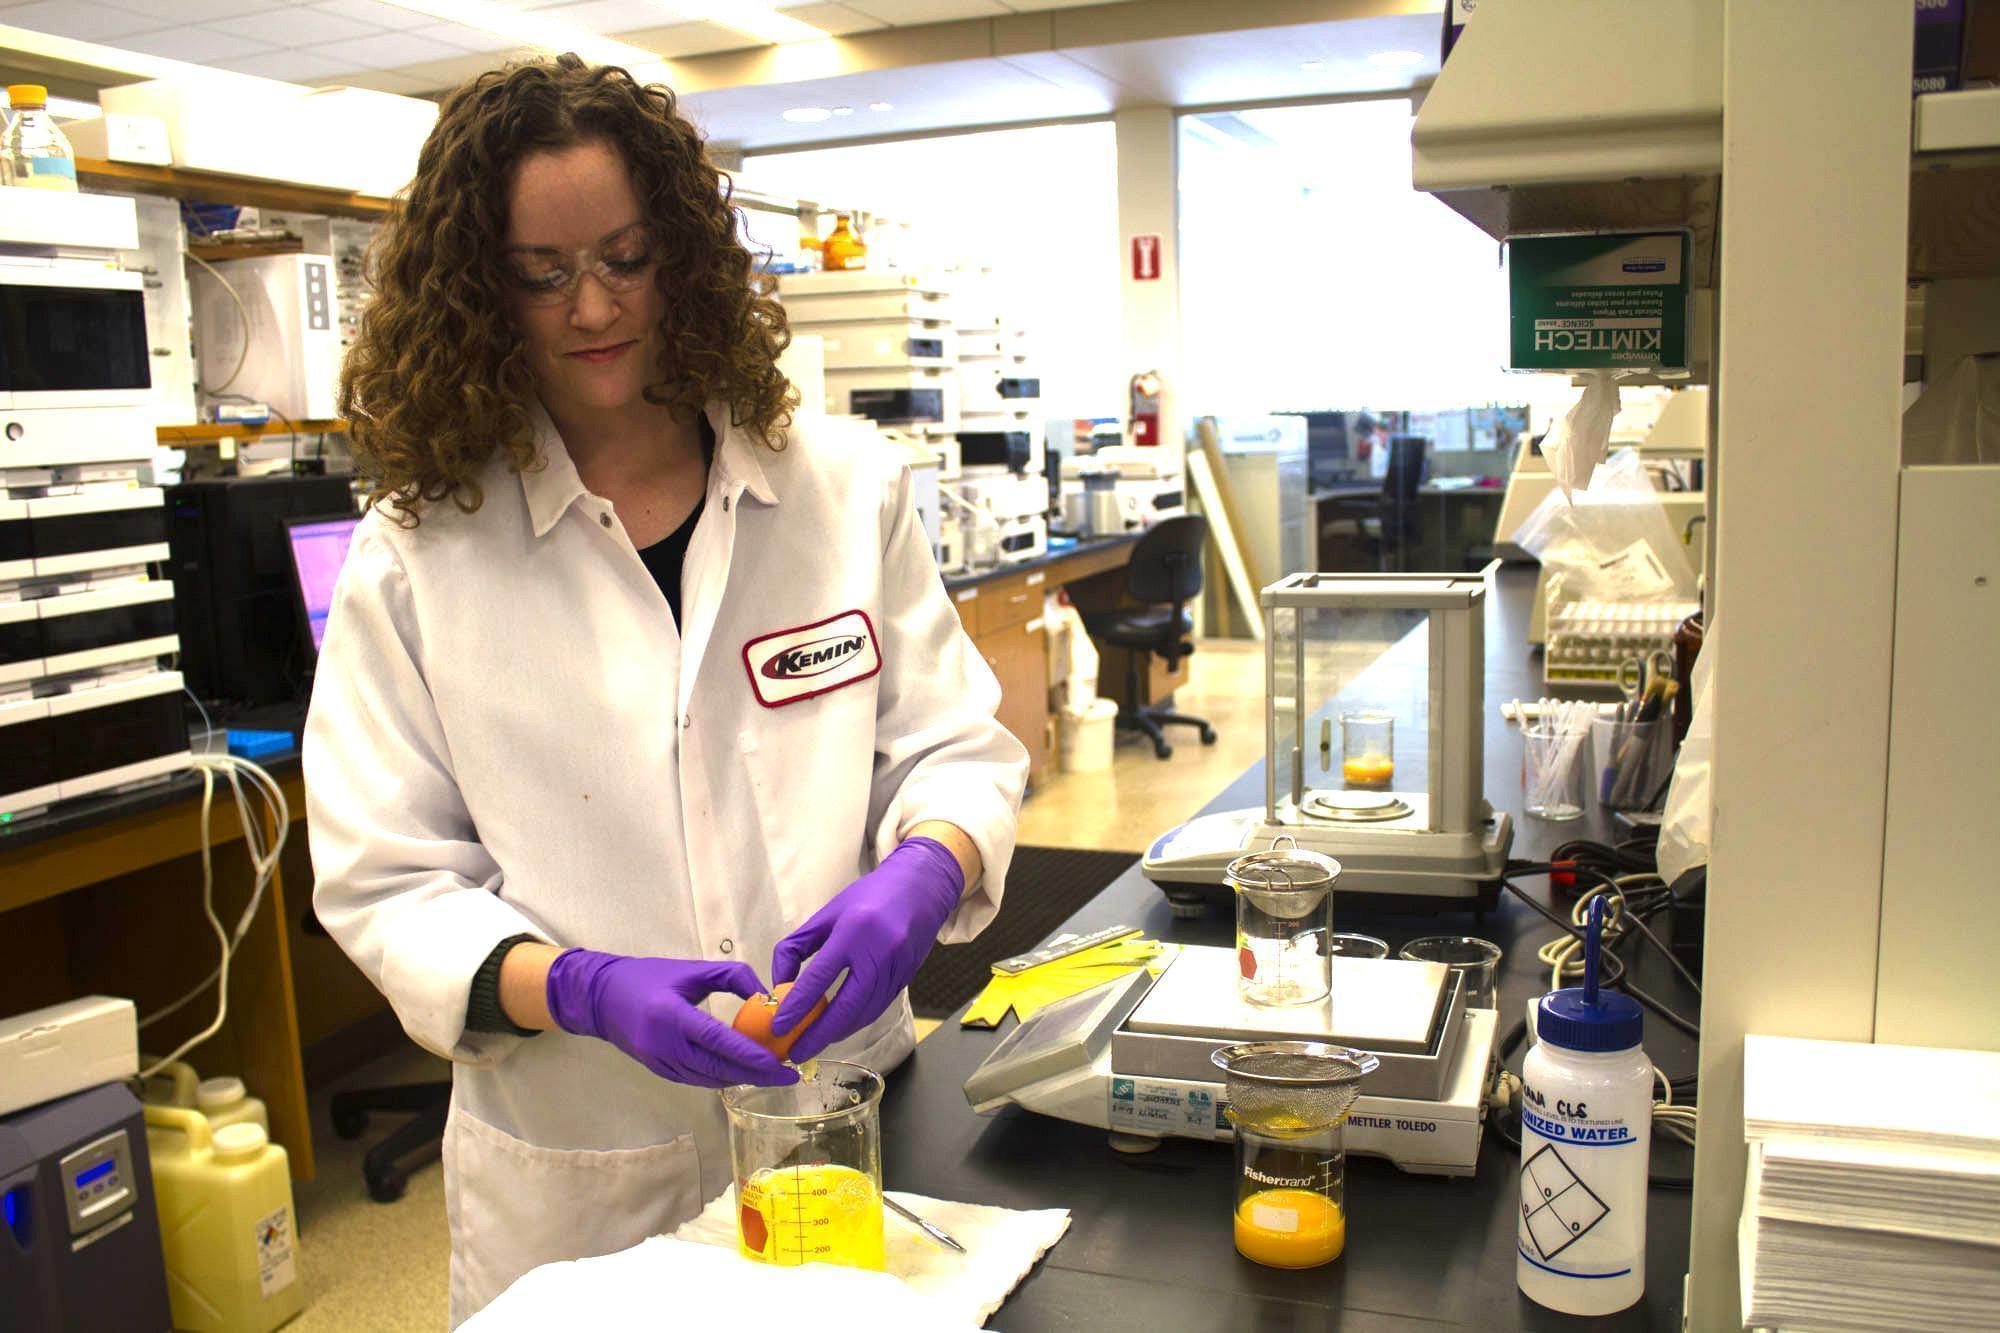 Elsie Rankin, a chemist at Kemin Industries in Des Moines, evaluates egg characteristics. The company is working on a product that could reduce the risk of African swine fever coming into the U.S. via contaminated feed.